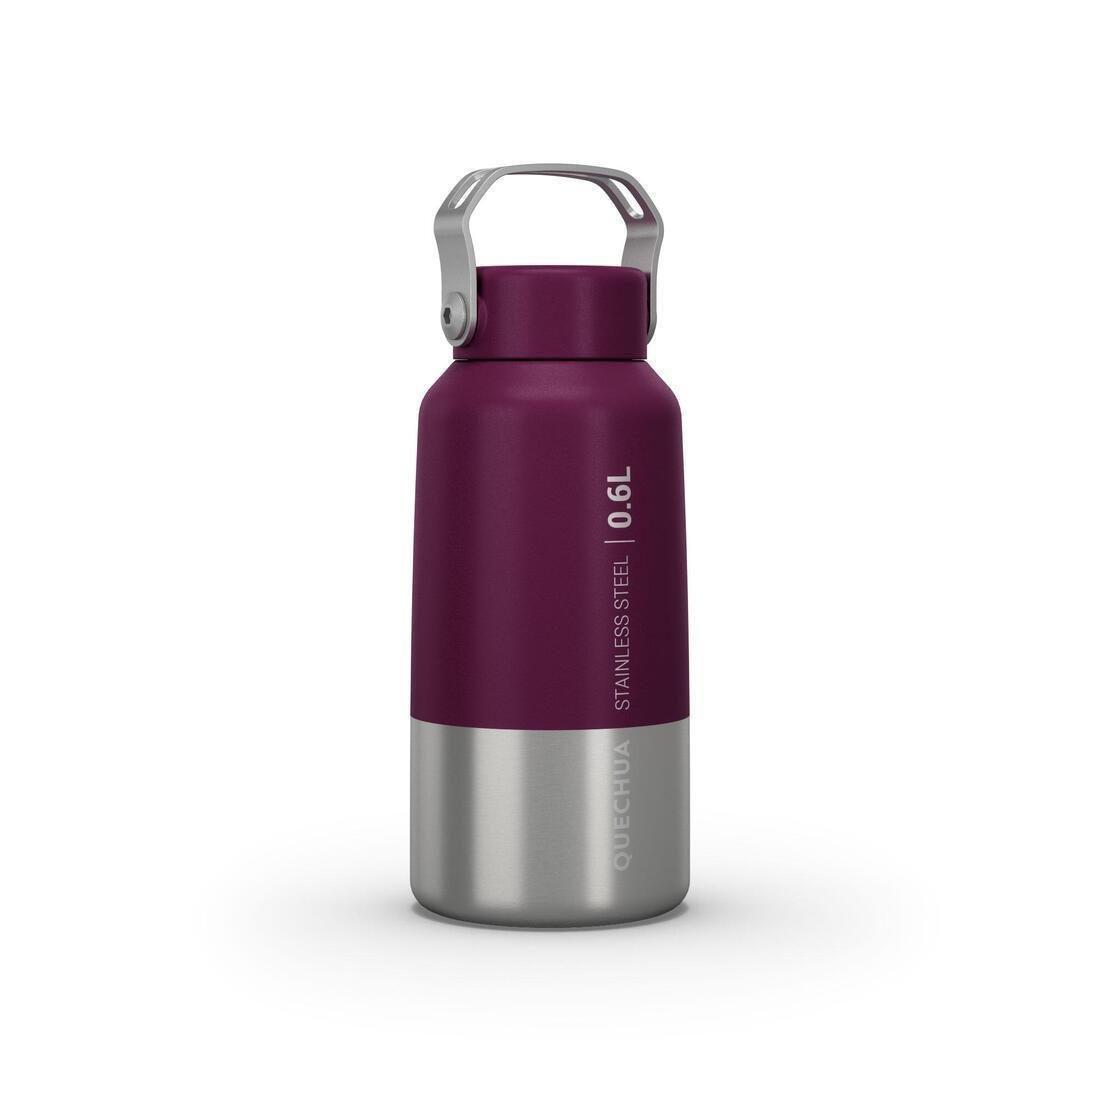 QUECHUA - Stainless Steel Hiking Flask With Screw Cap Mh100 0.6 L, Purple